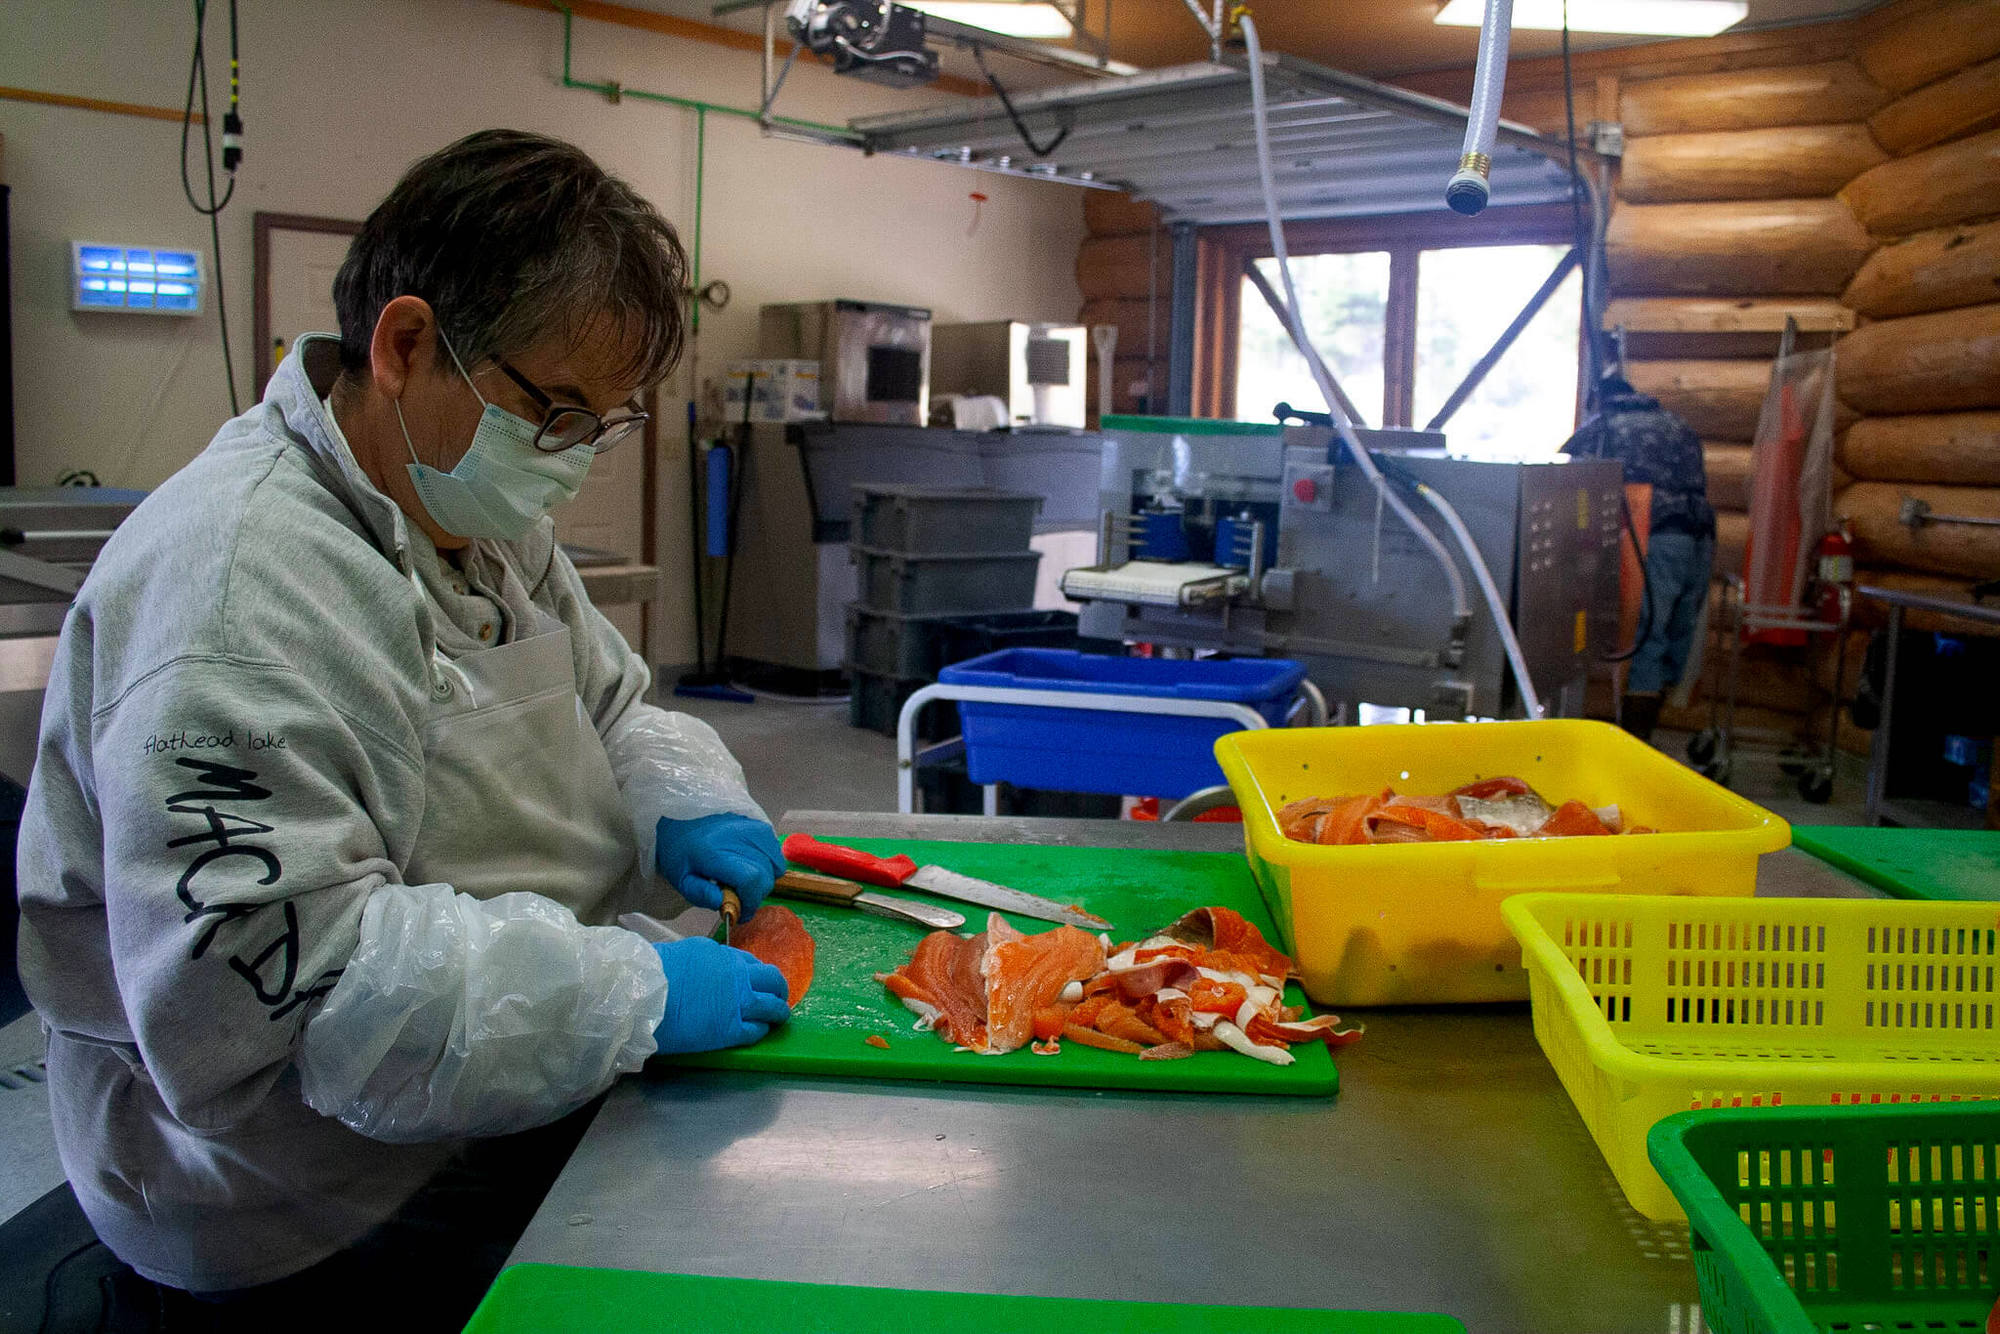 Cindy Bras-Benson, a member of the Confederated Salish and Kootenai Tribes (CSKT) lives near Flathead Lake in Montana. Here she is seen processing lake trout in the facility. November 2021